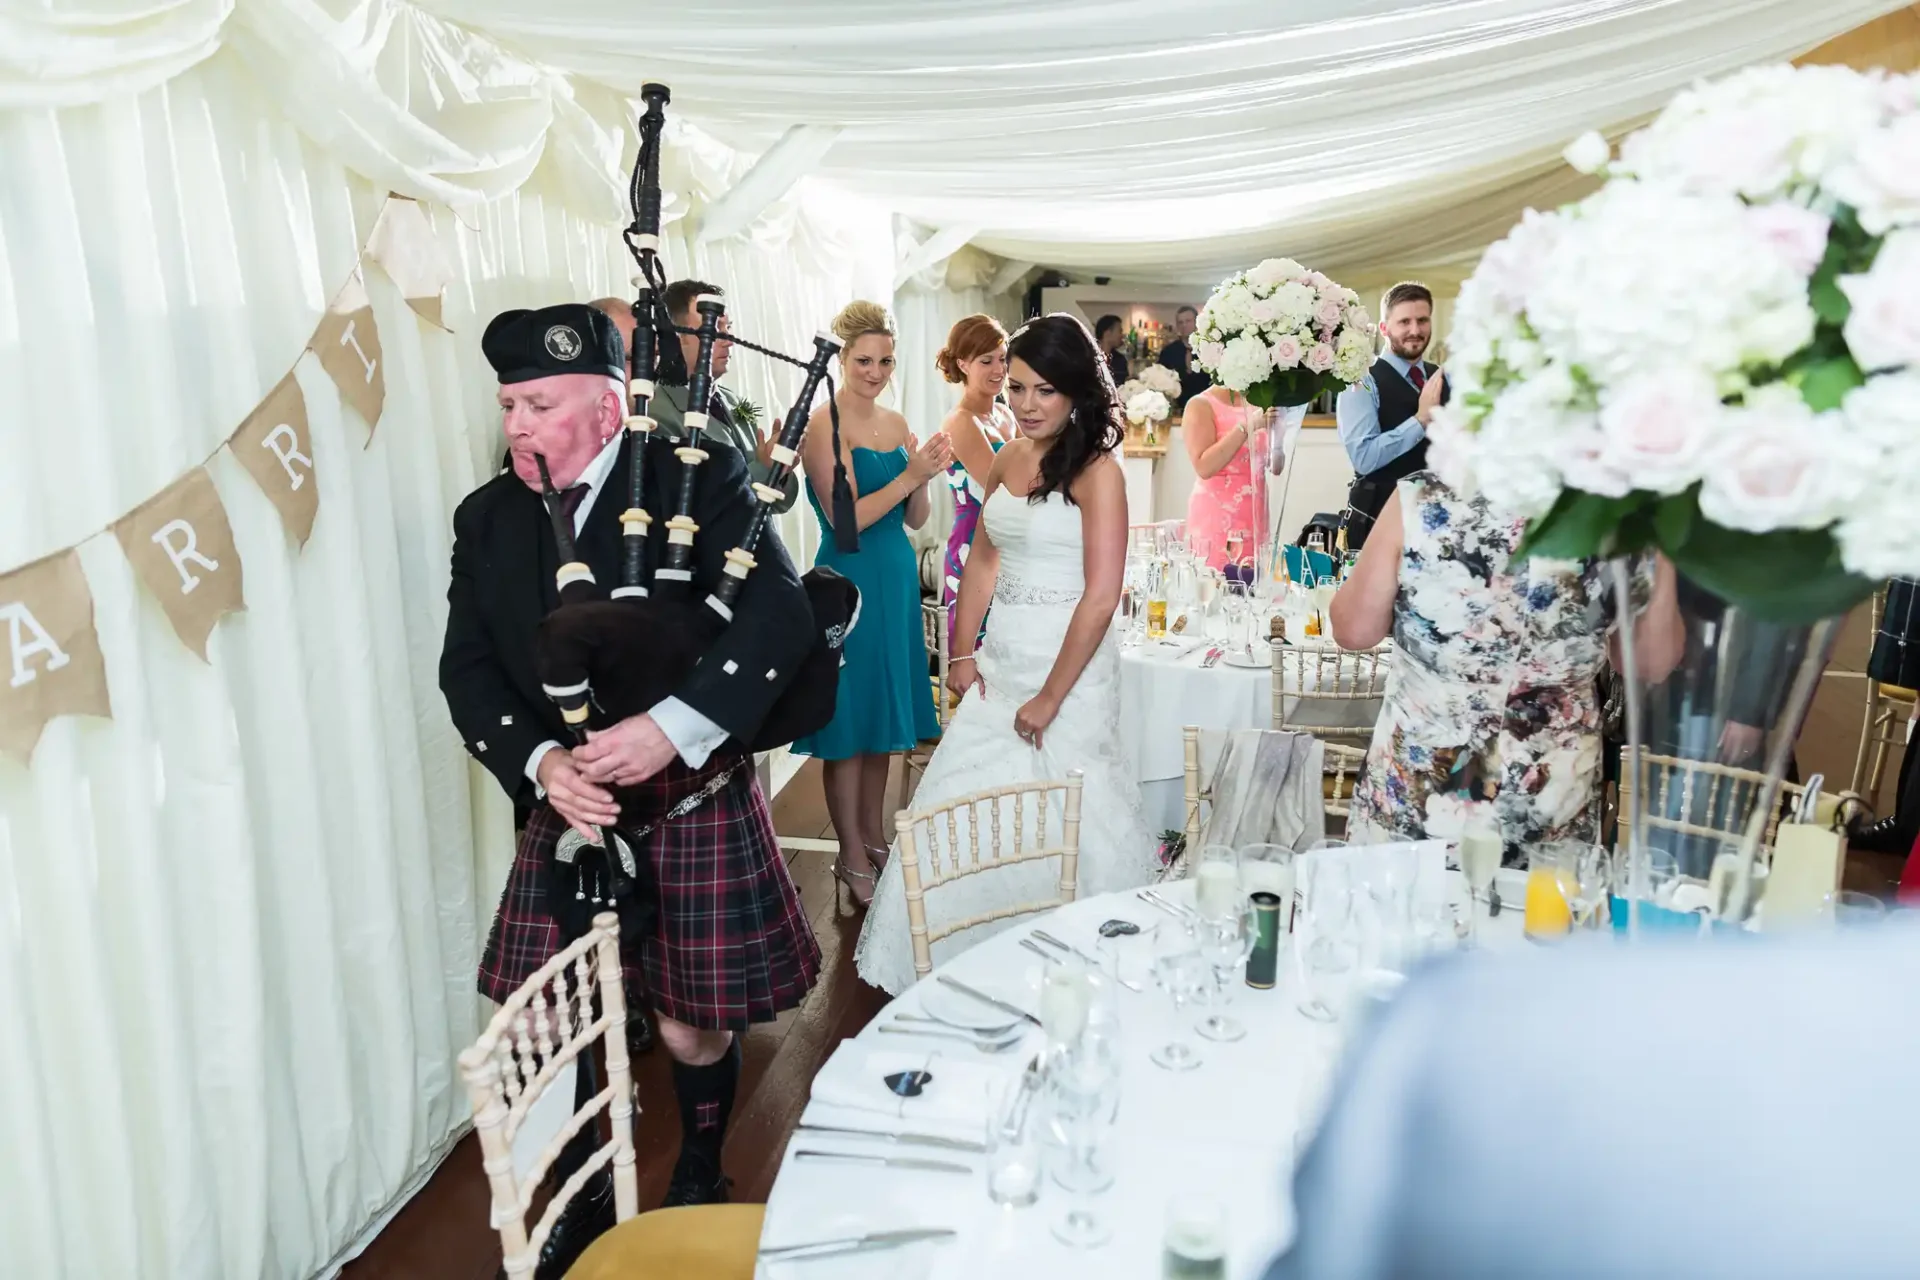 A bagpiper leads a bride through a wedding reception tent, with guests standing and applauding.